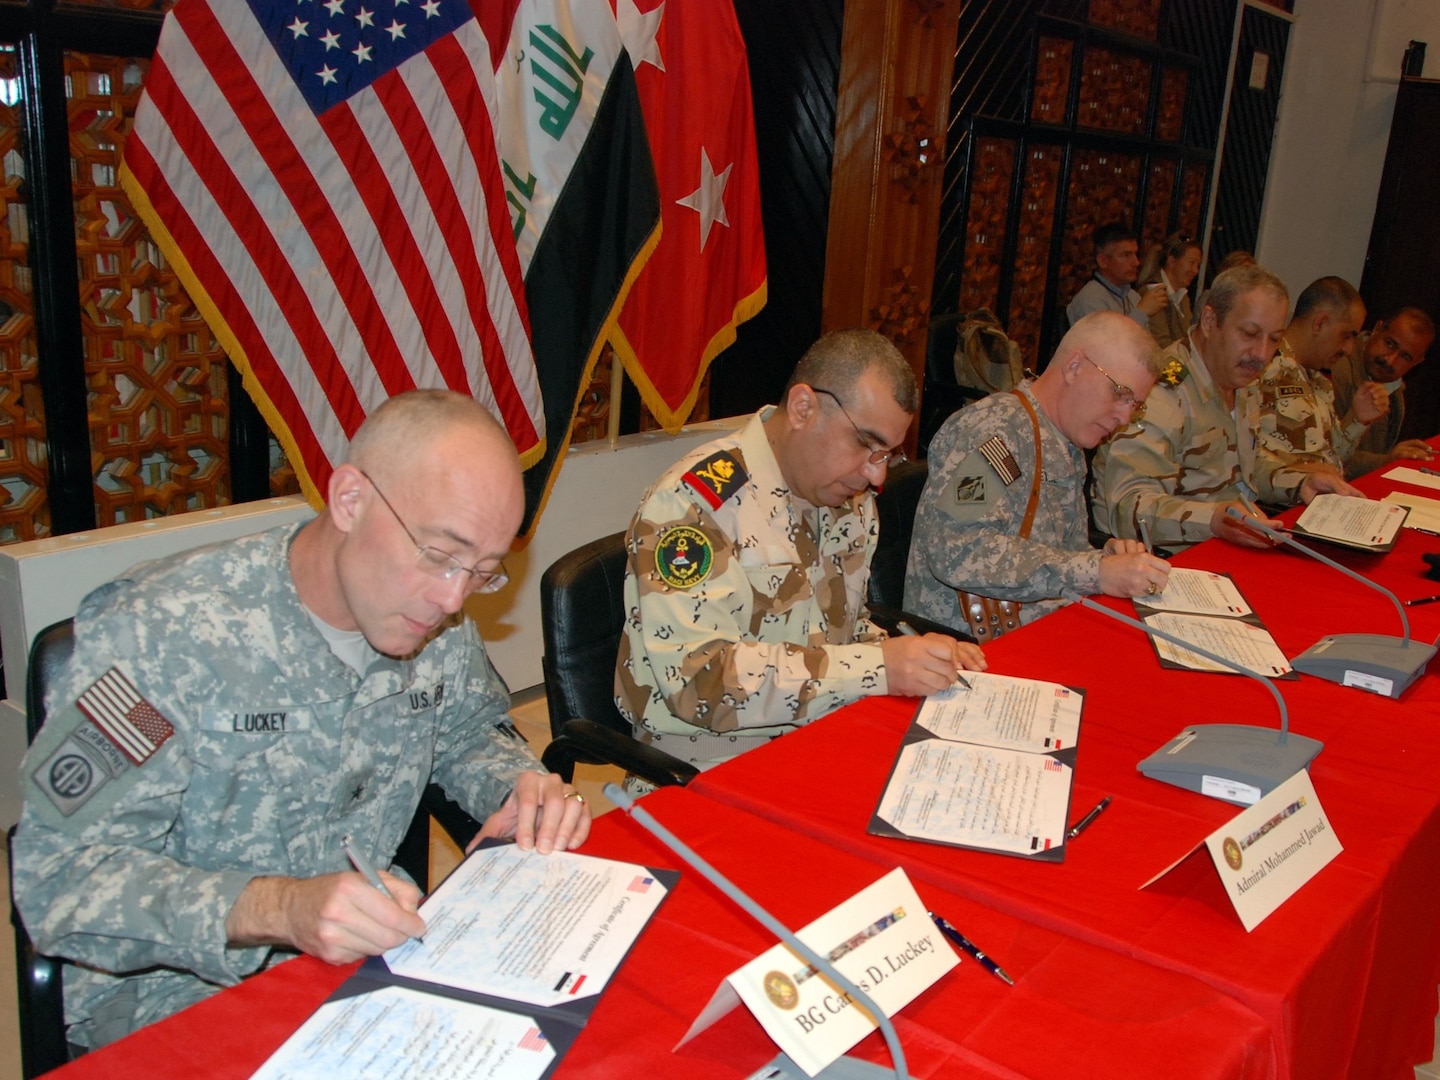 U.S. and Iraqi officials sign a certificate of agreement at the Gulf Region Division headquarters in Baghdad, Feb. 12, 2009, signaling design approval for the $53 million Umm Qasr pier and seawall project.